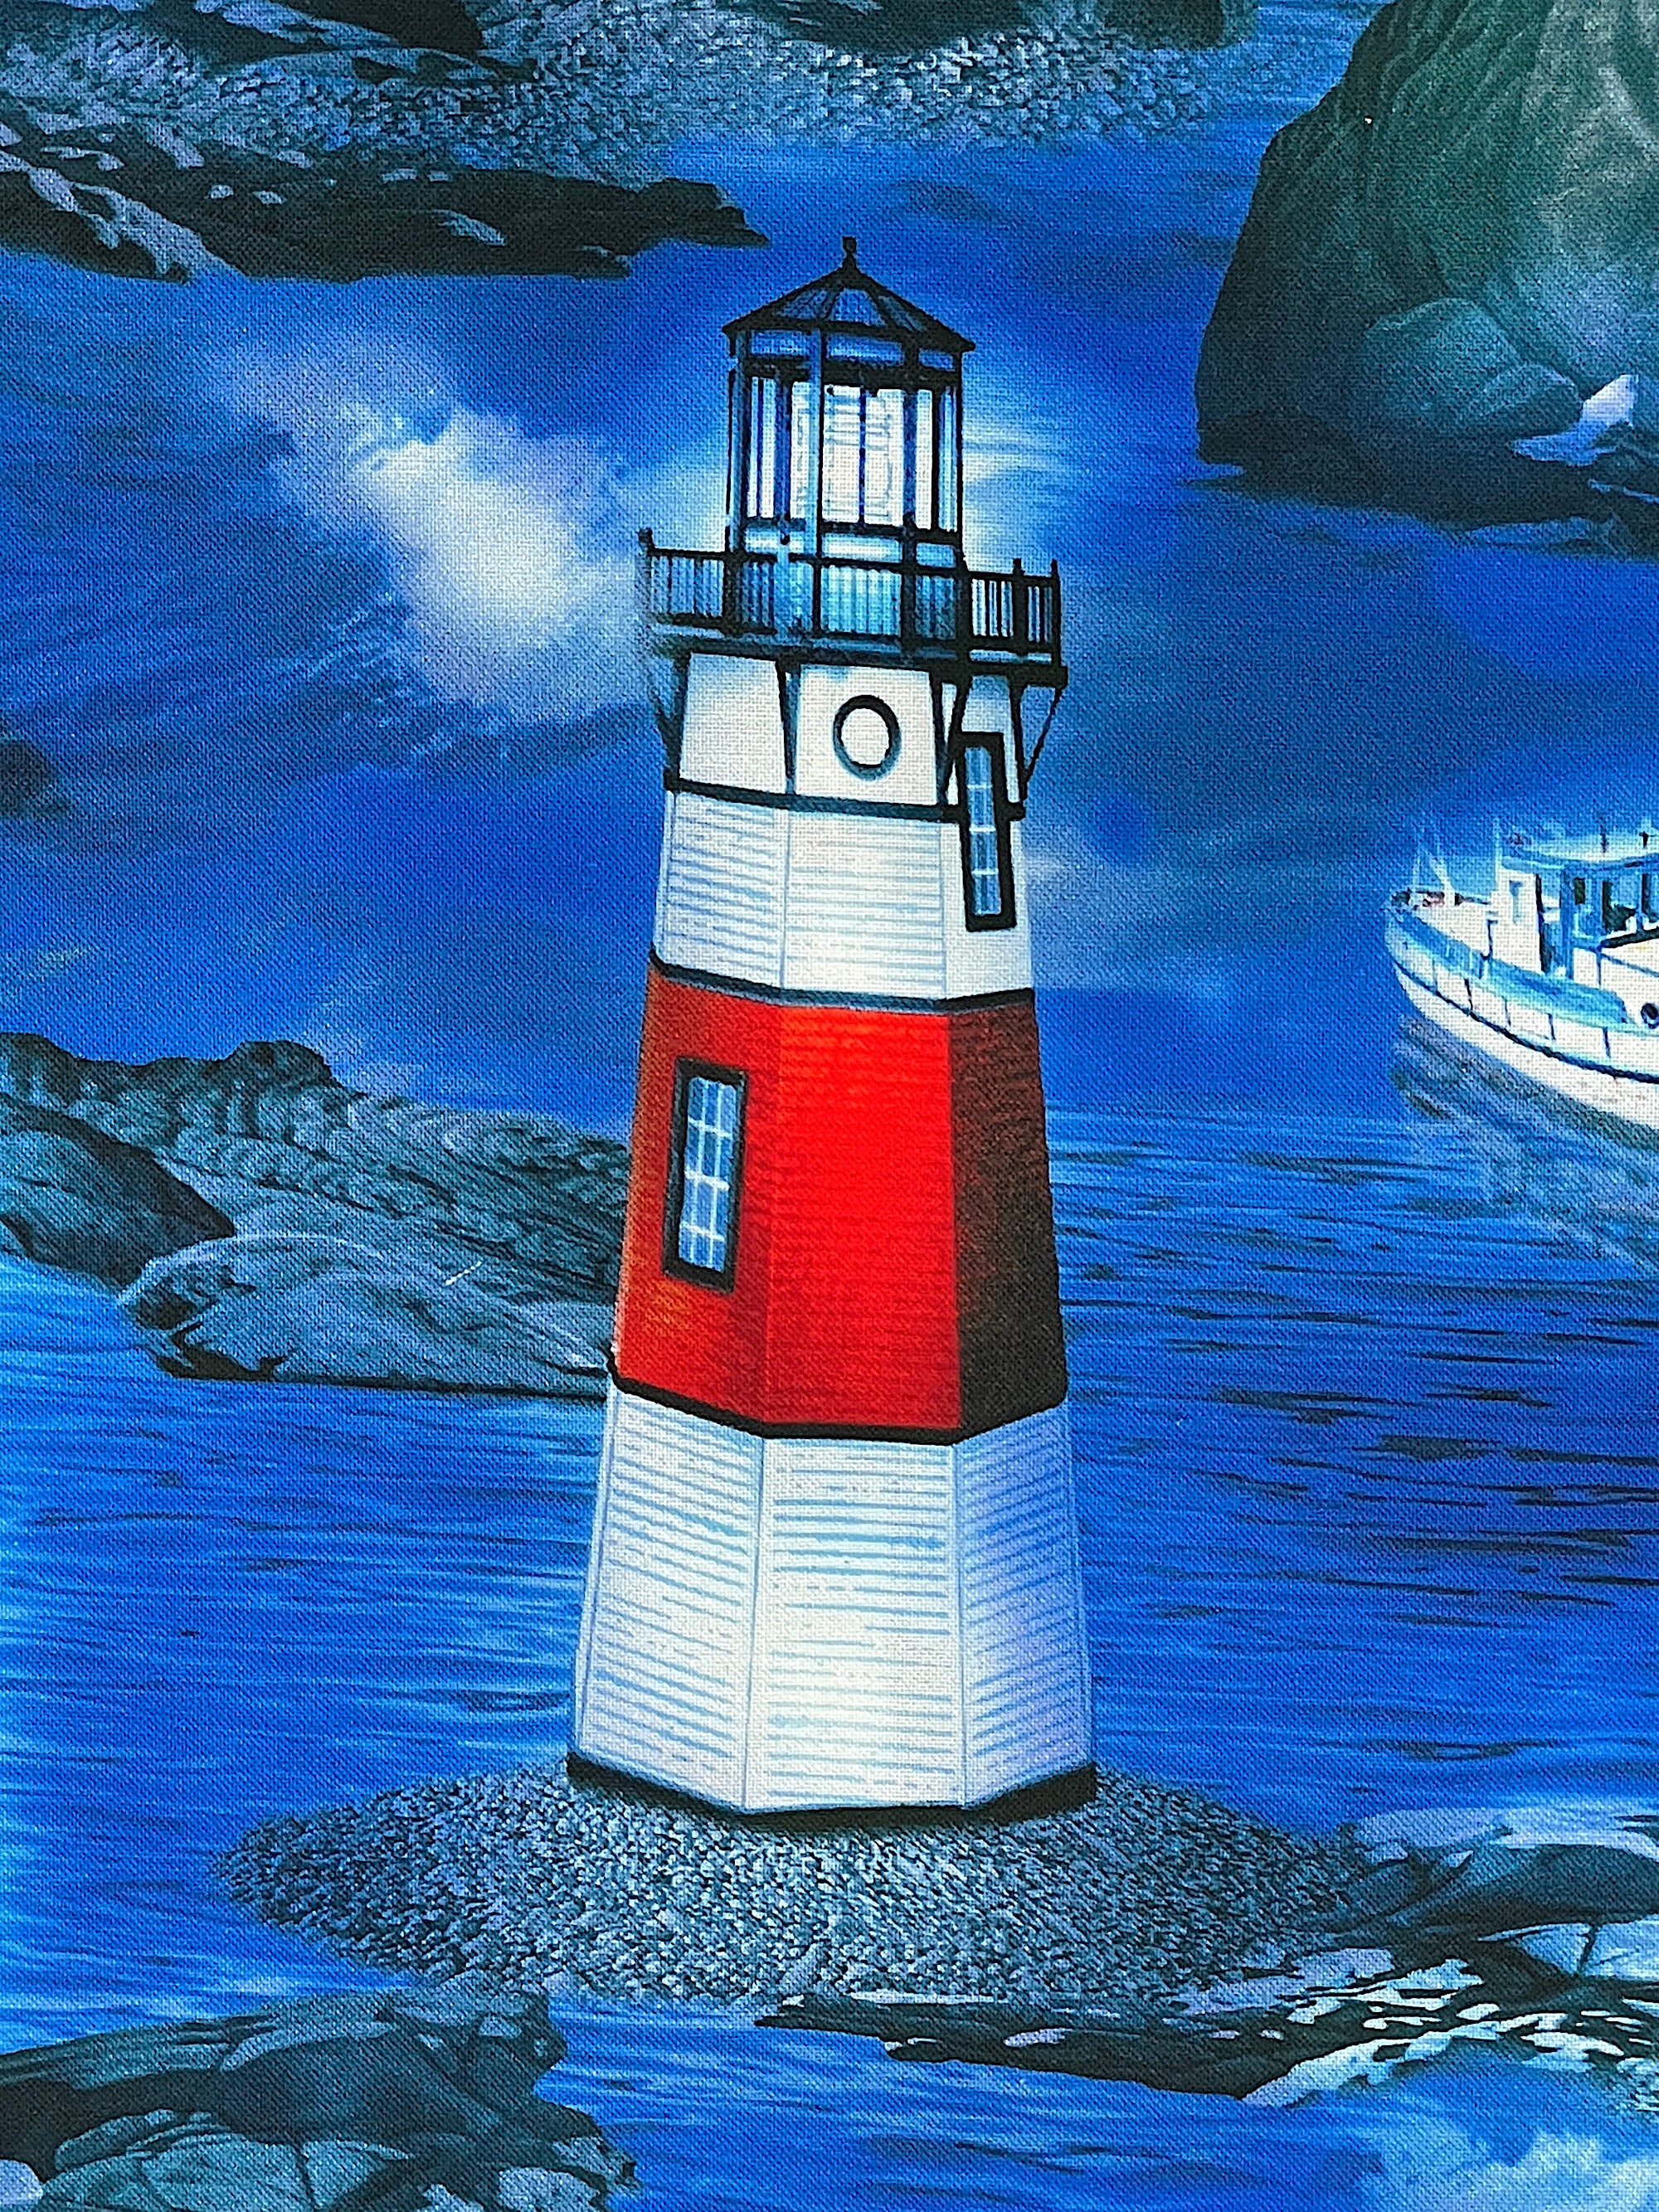 Close up of a red and white lighthouse with a boat in the background.